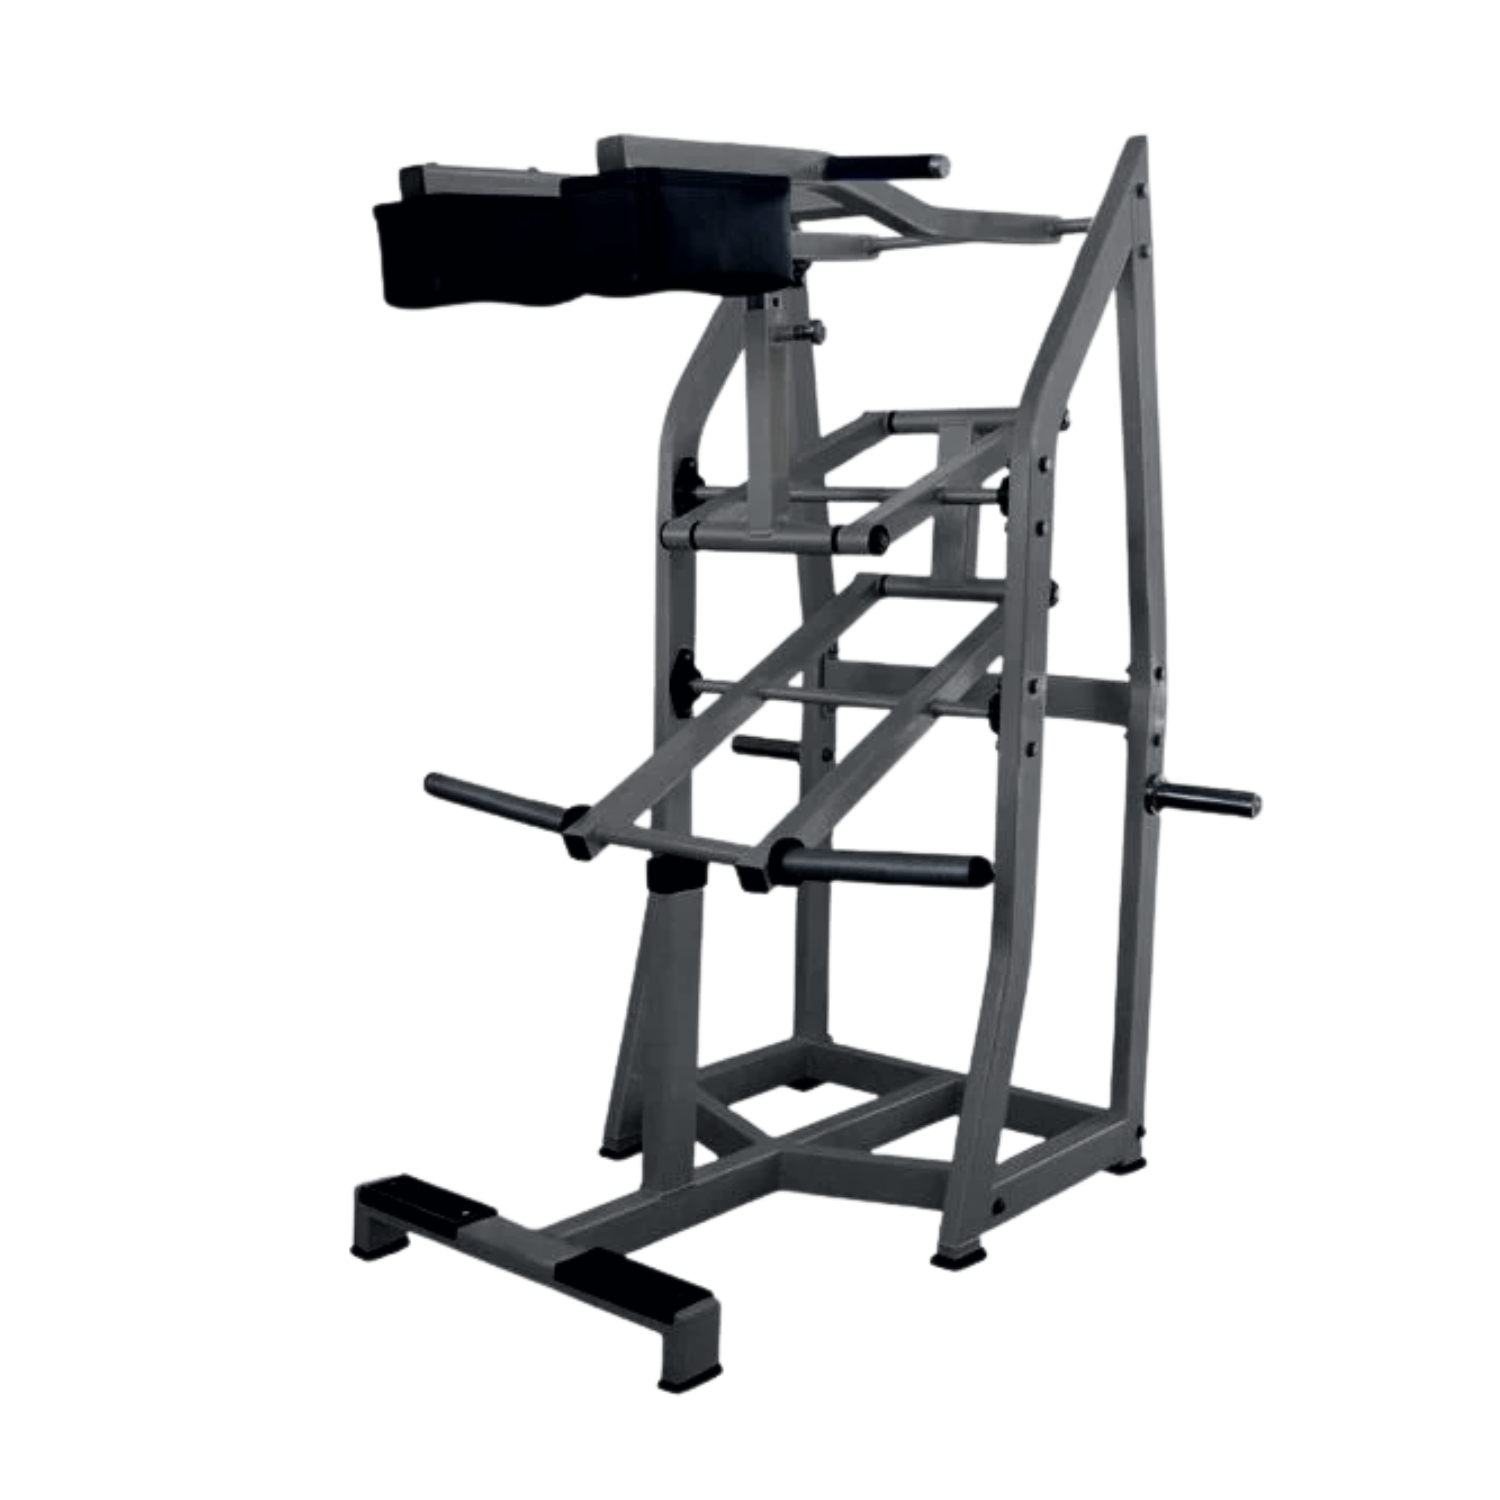 COMMERCIAL PLATE LOADED STANDING CALF RAISE 2-Commercial Calf Raises-Gym Direct